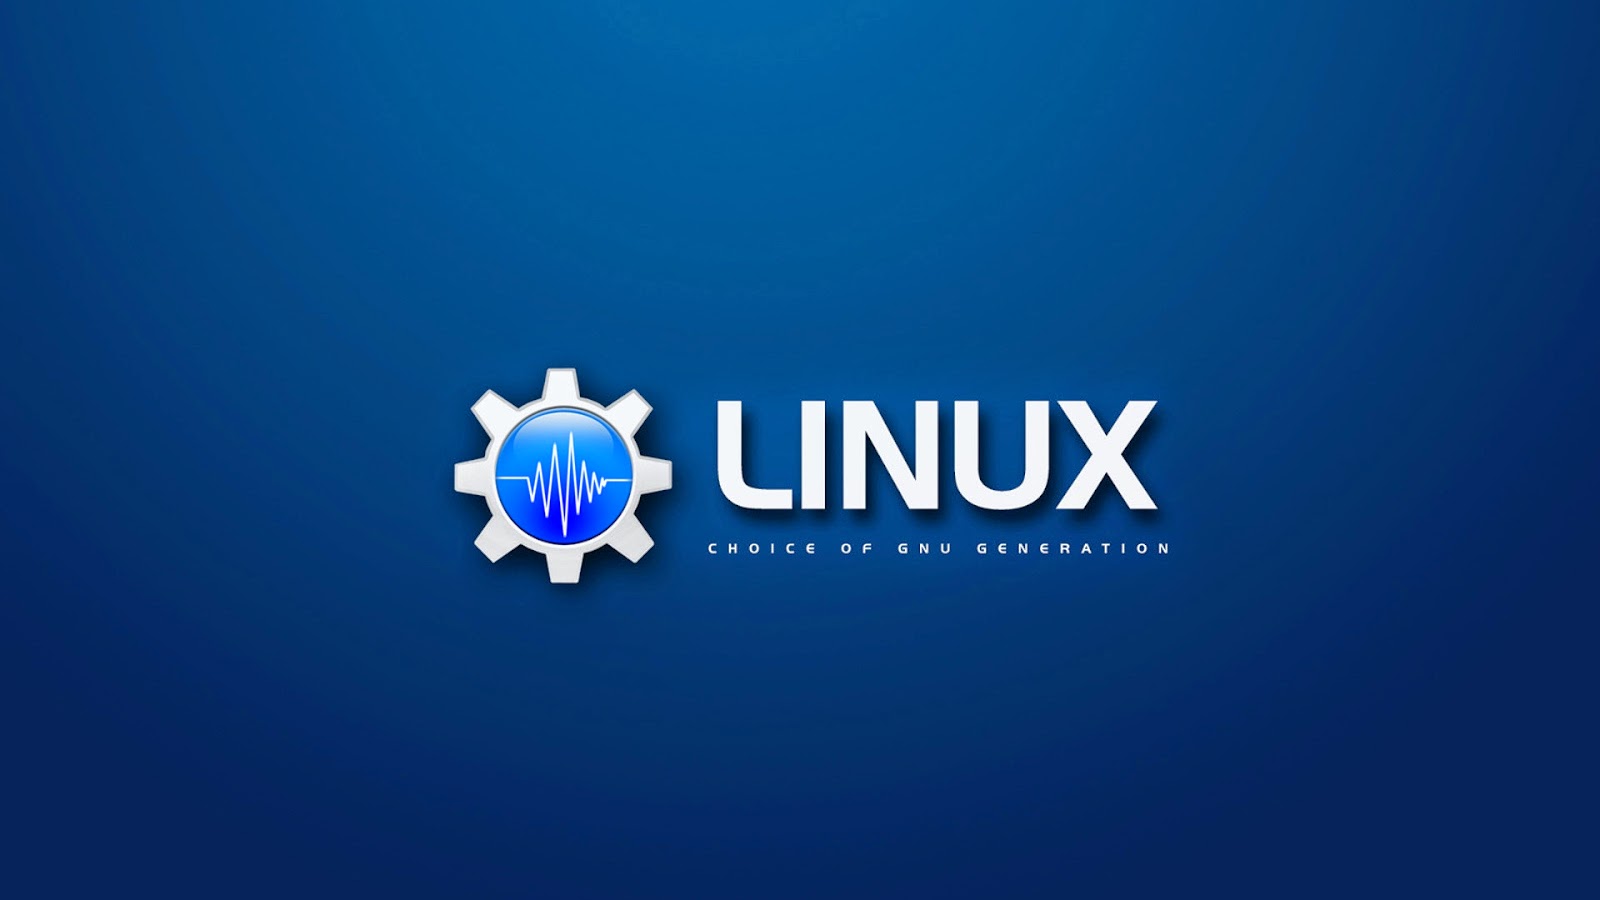 Linux HD Wallpapers Collection | Only 4 Hacker